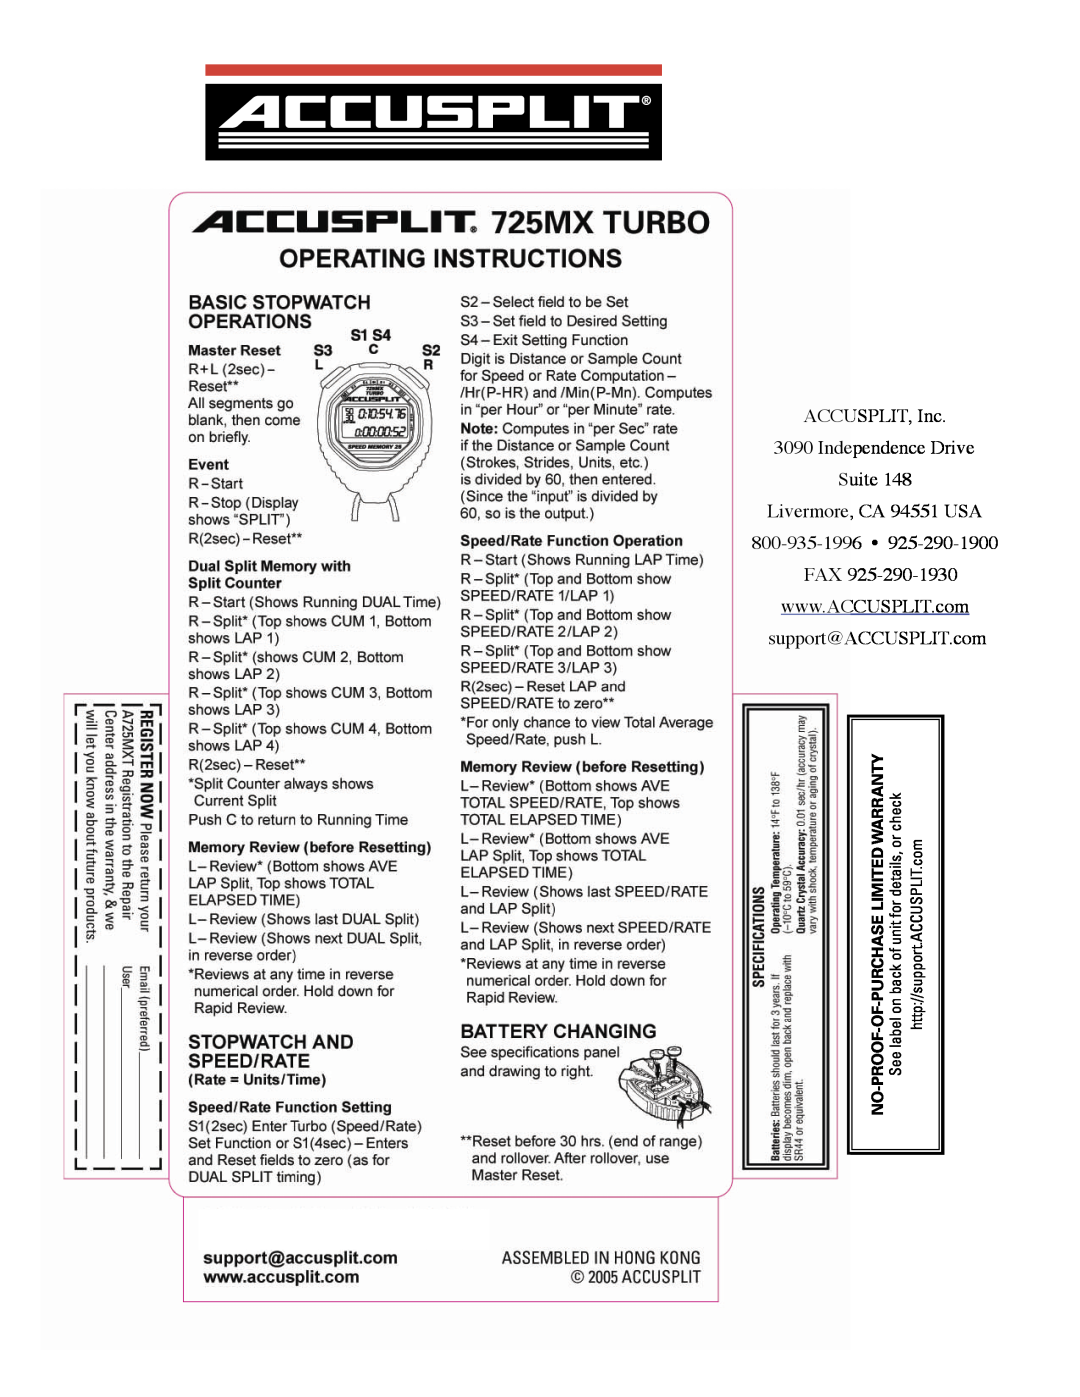 Accusplit A725MXT warranty ACCUSPLIT, Inc 3090 Independence Drive Suite Livermore, CA 94551 USA 